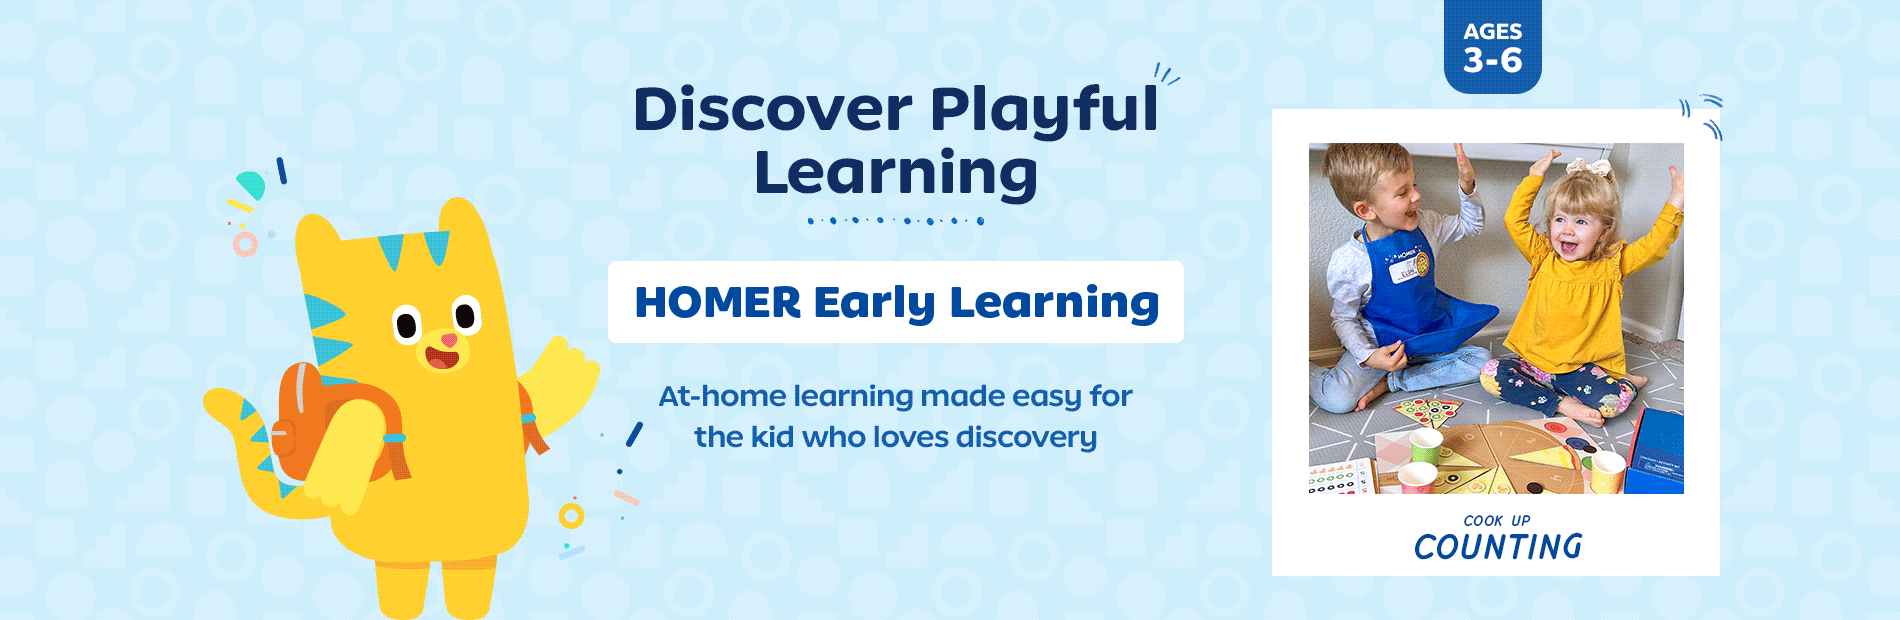 Discovery Playful Learning HOMER Early Learning At-home learning made easy for the kid who loves discovery